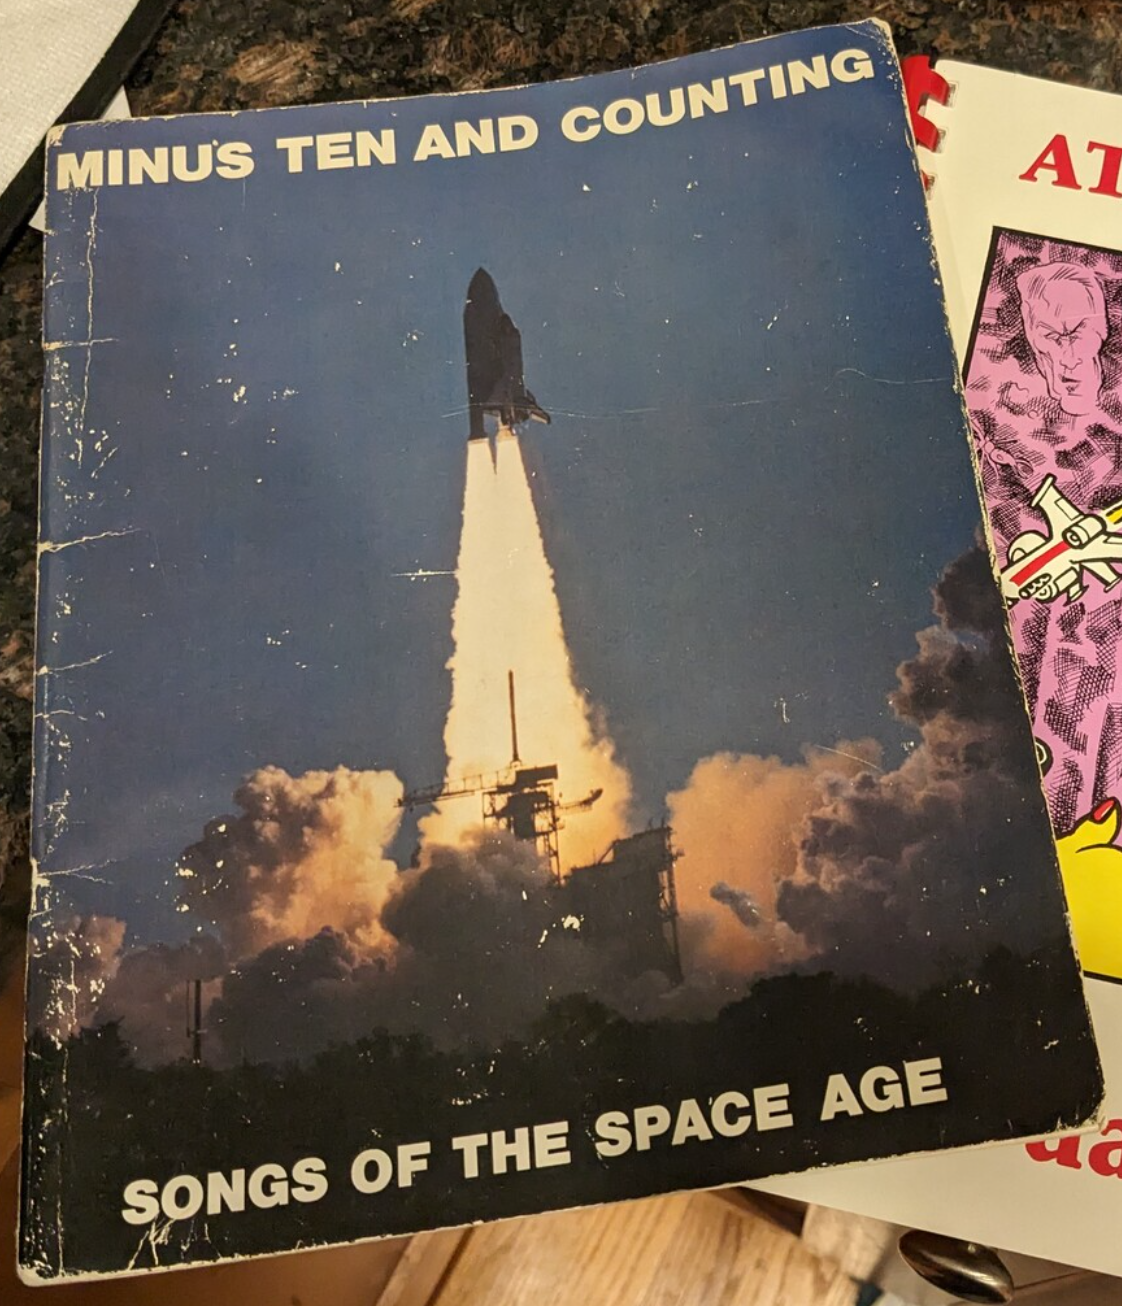 the Minus Ten and Counting: Songs of the Space Age songbook. It issignificantly boxed at the edges and bears a photograph of the Space Shuttletaking off, sans megagantry.